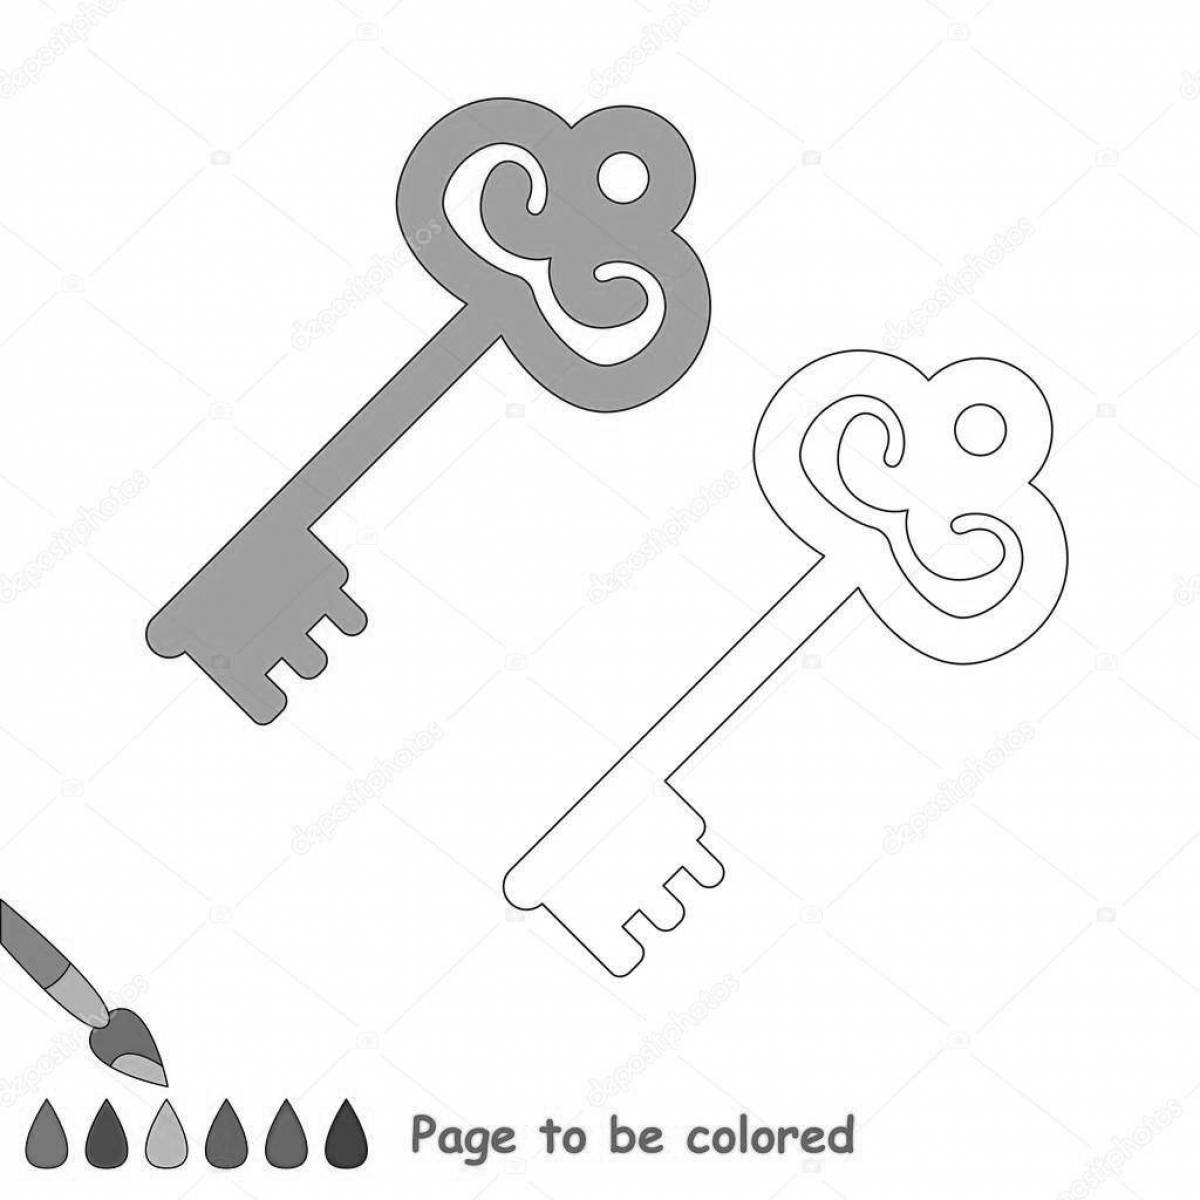 Live key coloring for kids